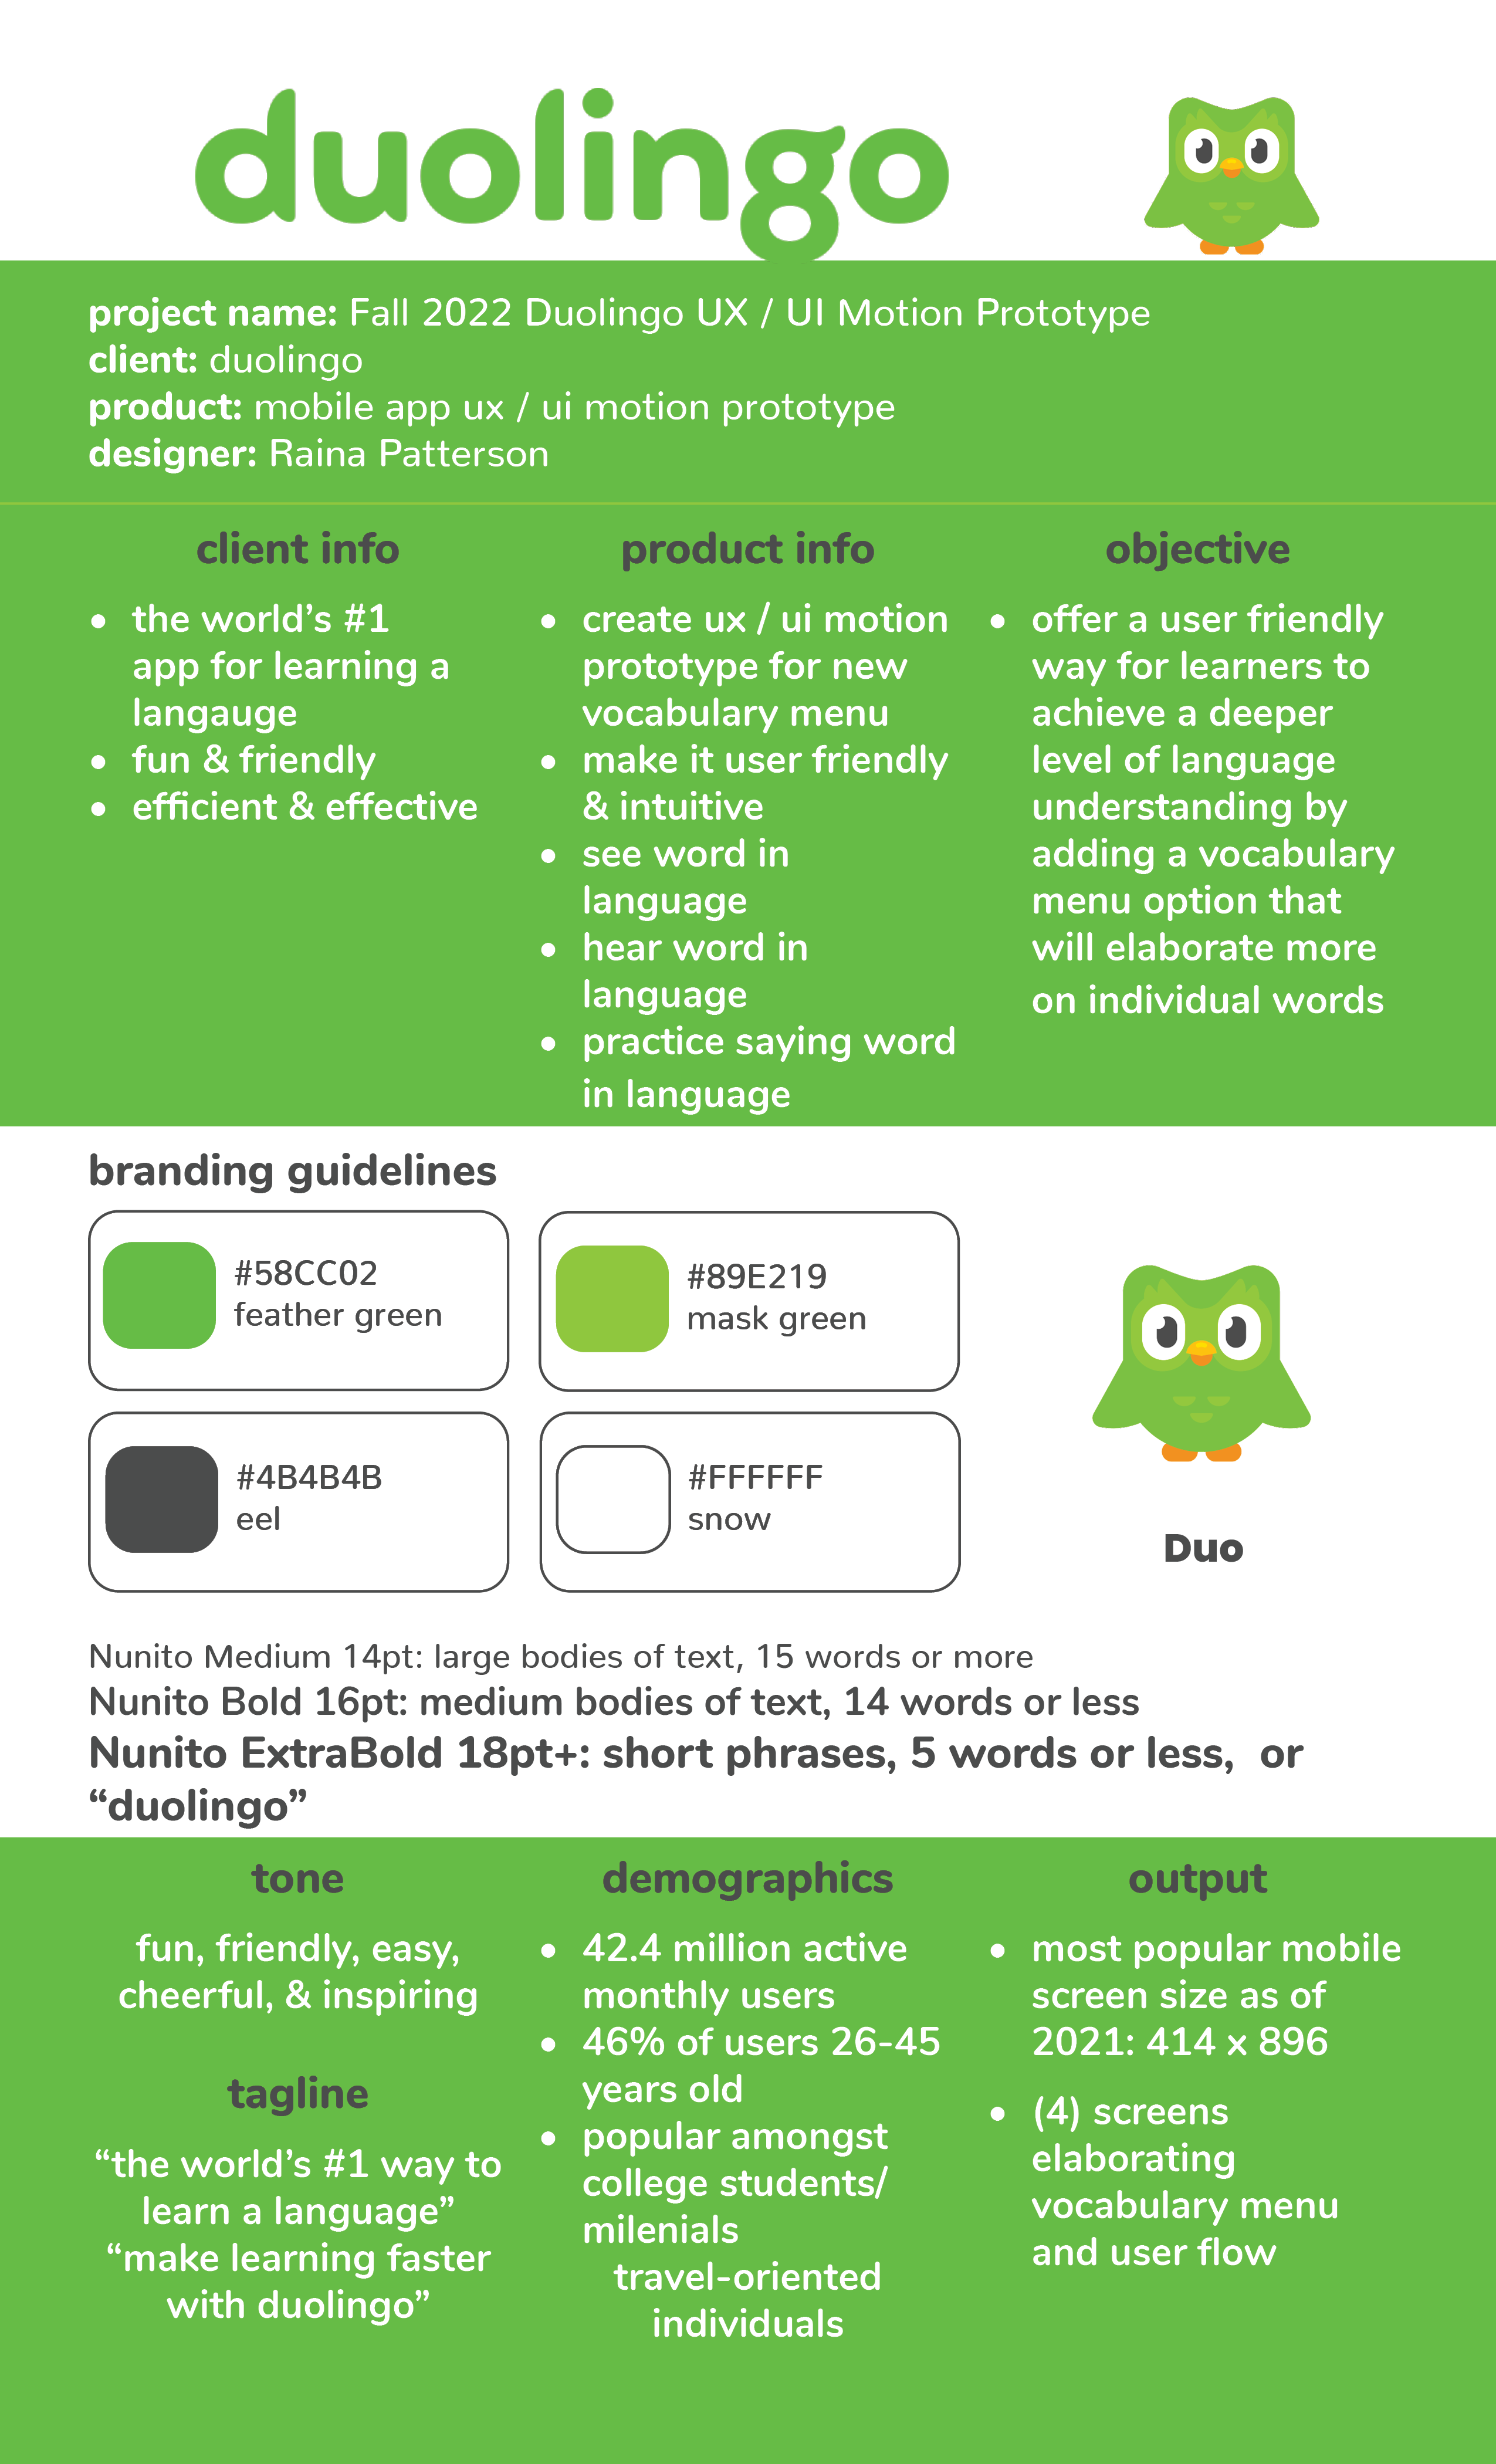 Creative brief document for Duolingo project